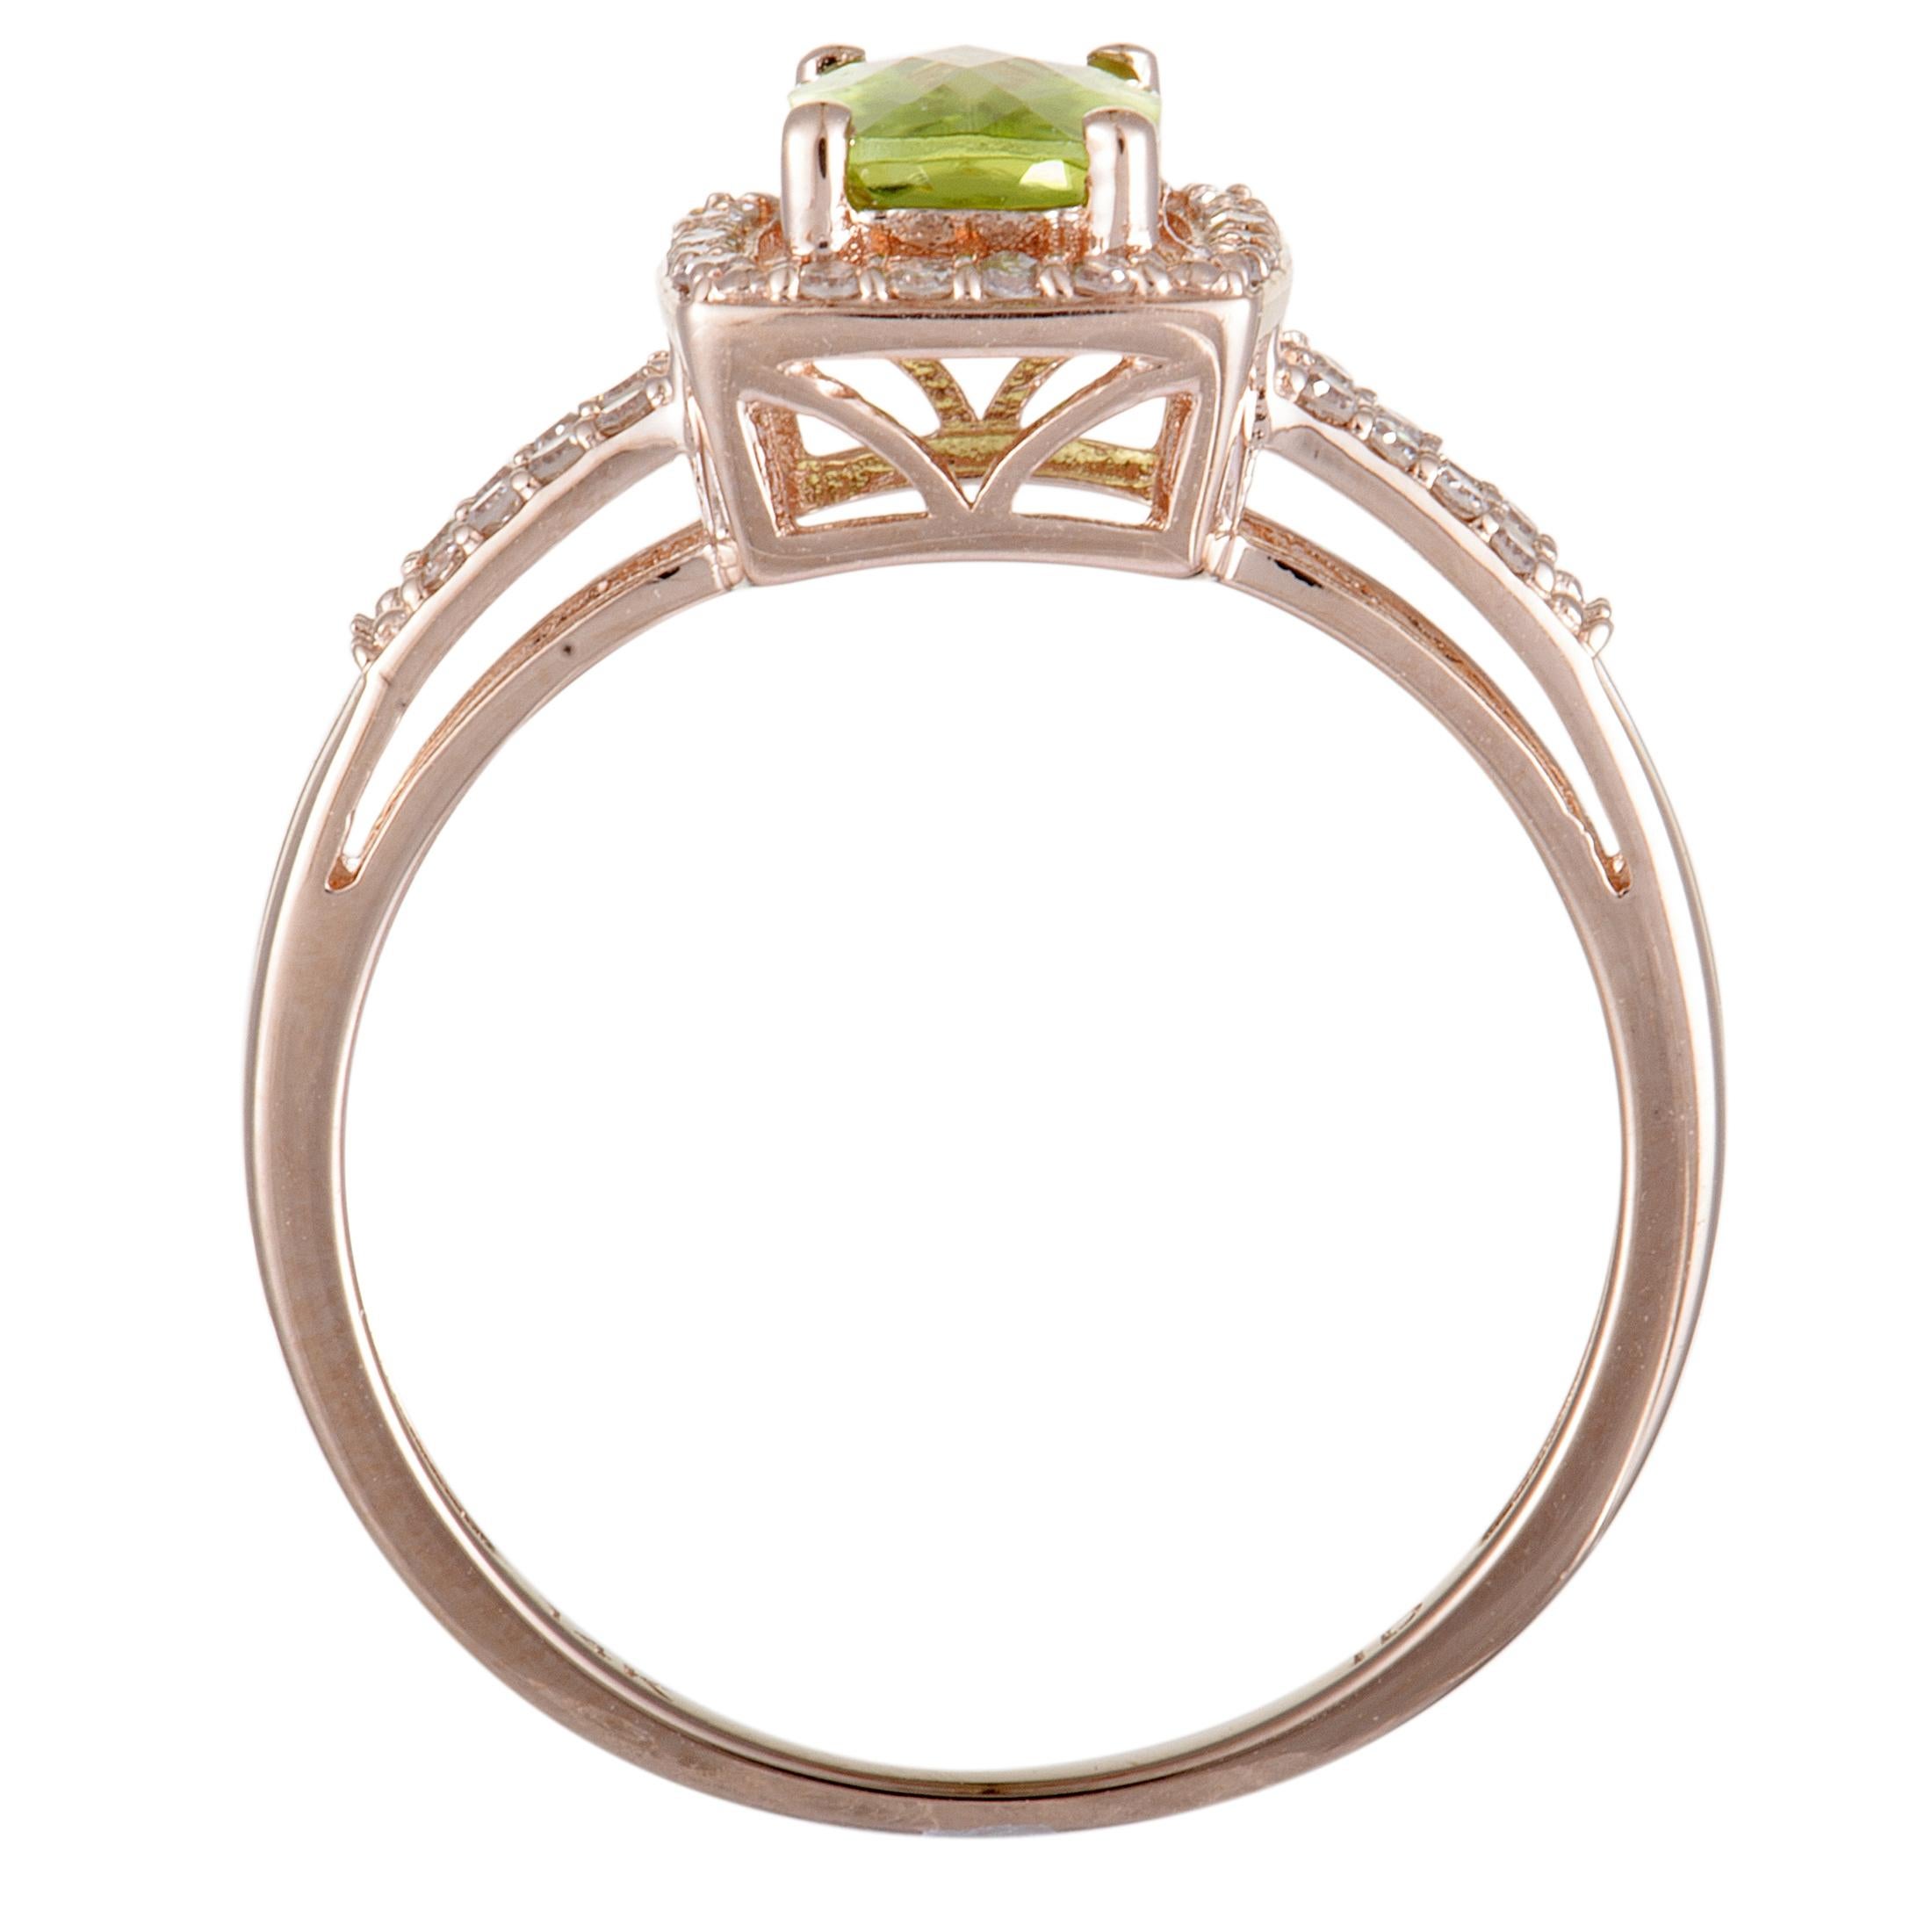 The expertly cut peridot takes the central place in this superb ring in an exceptionally eye-catching manner, beautifully contrasting the warm-toned radiance of rose gold and the bright resplendence of white diamonds. This delightful jewelry piece